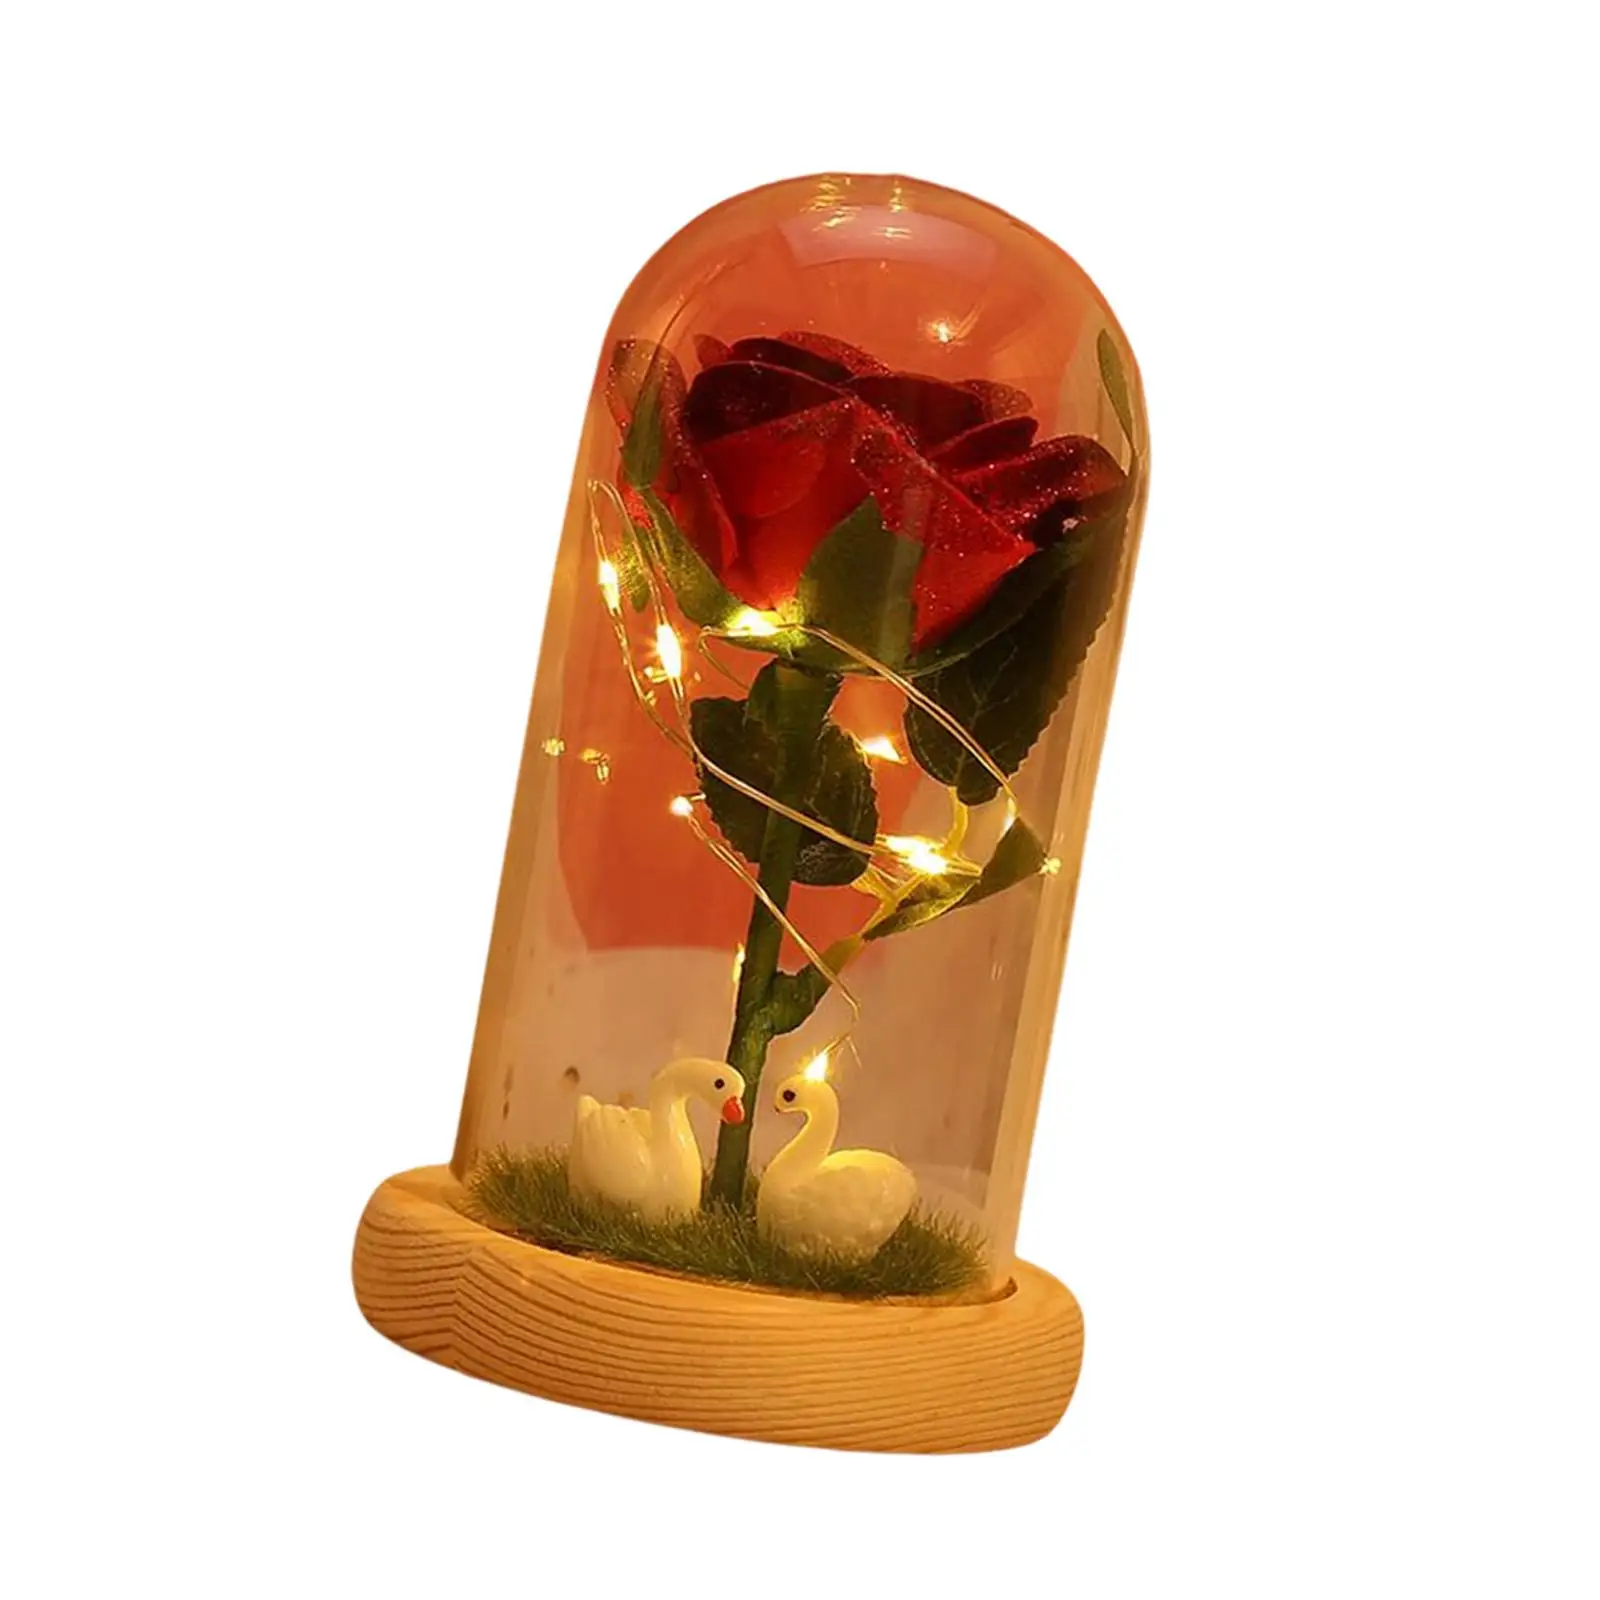 Unique Light up Rose Floral Crafts Simulated Flowers Light W/ Base Ornaments for Valentines Day Wedding Anniversary Women Girls